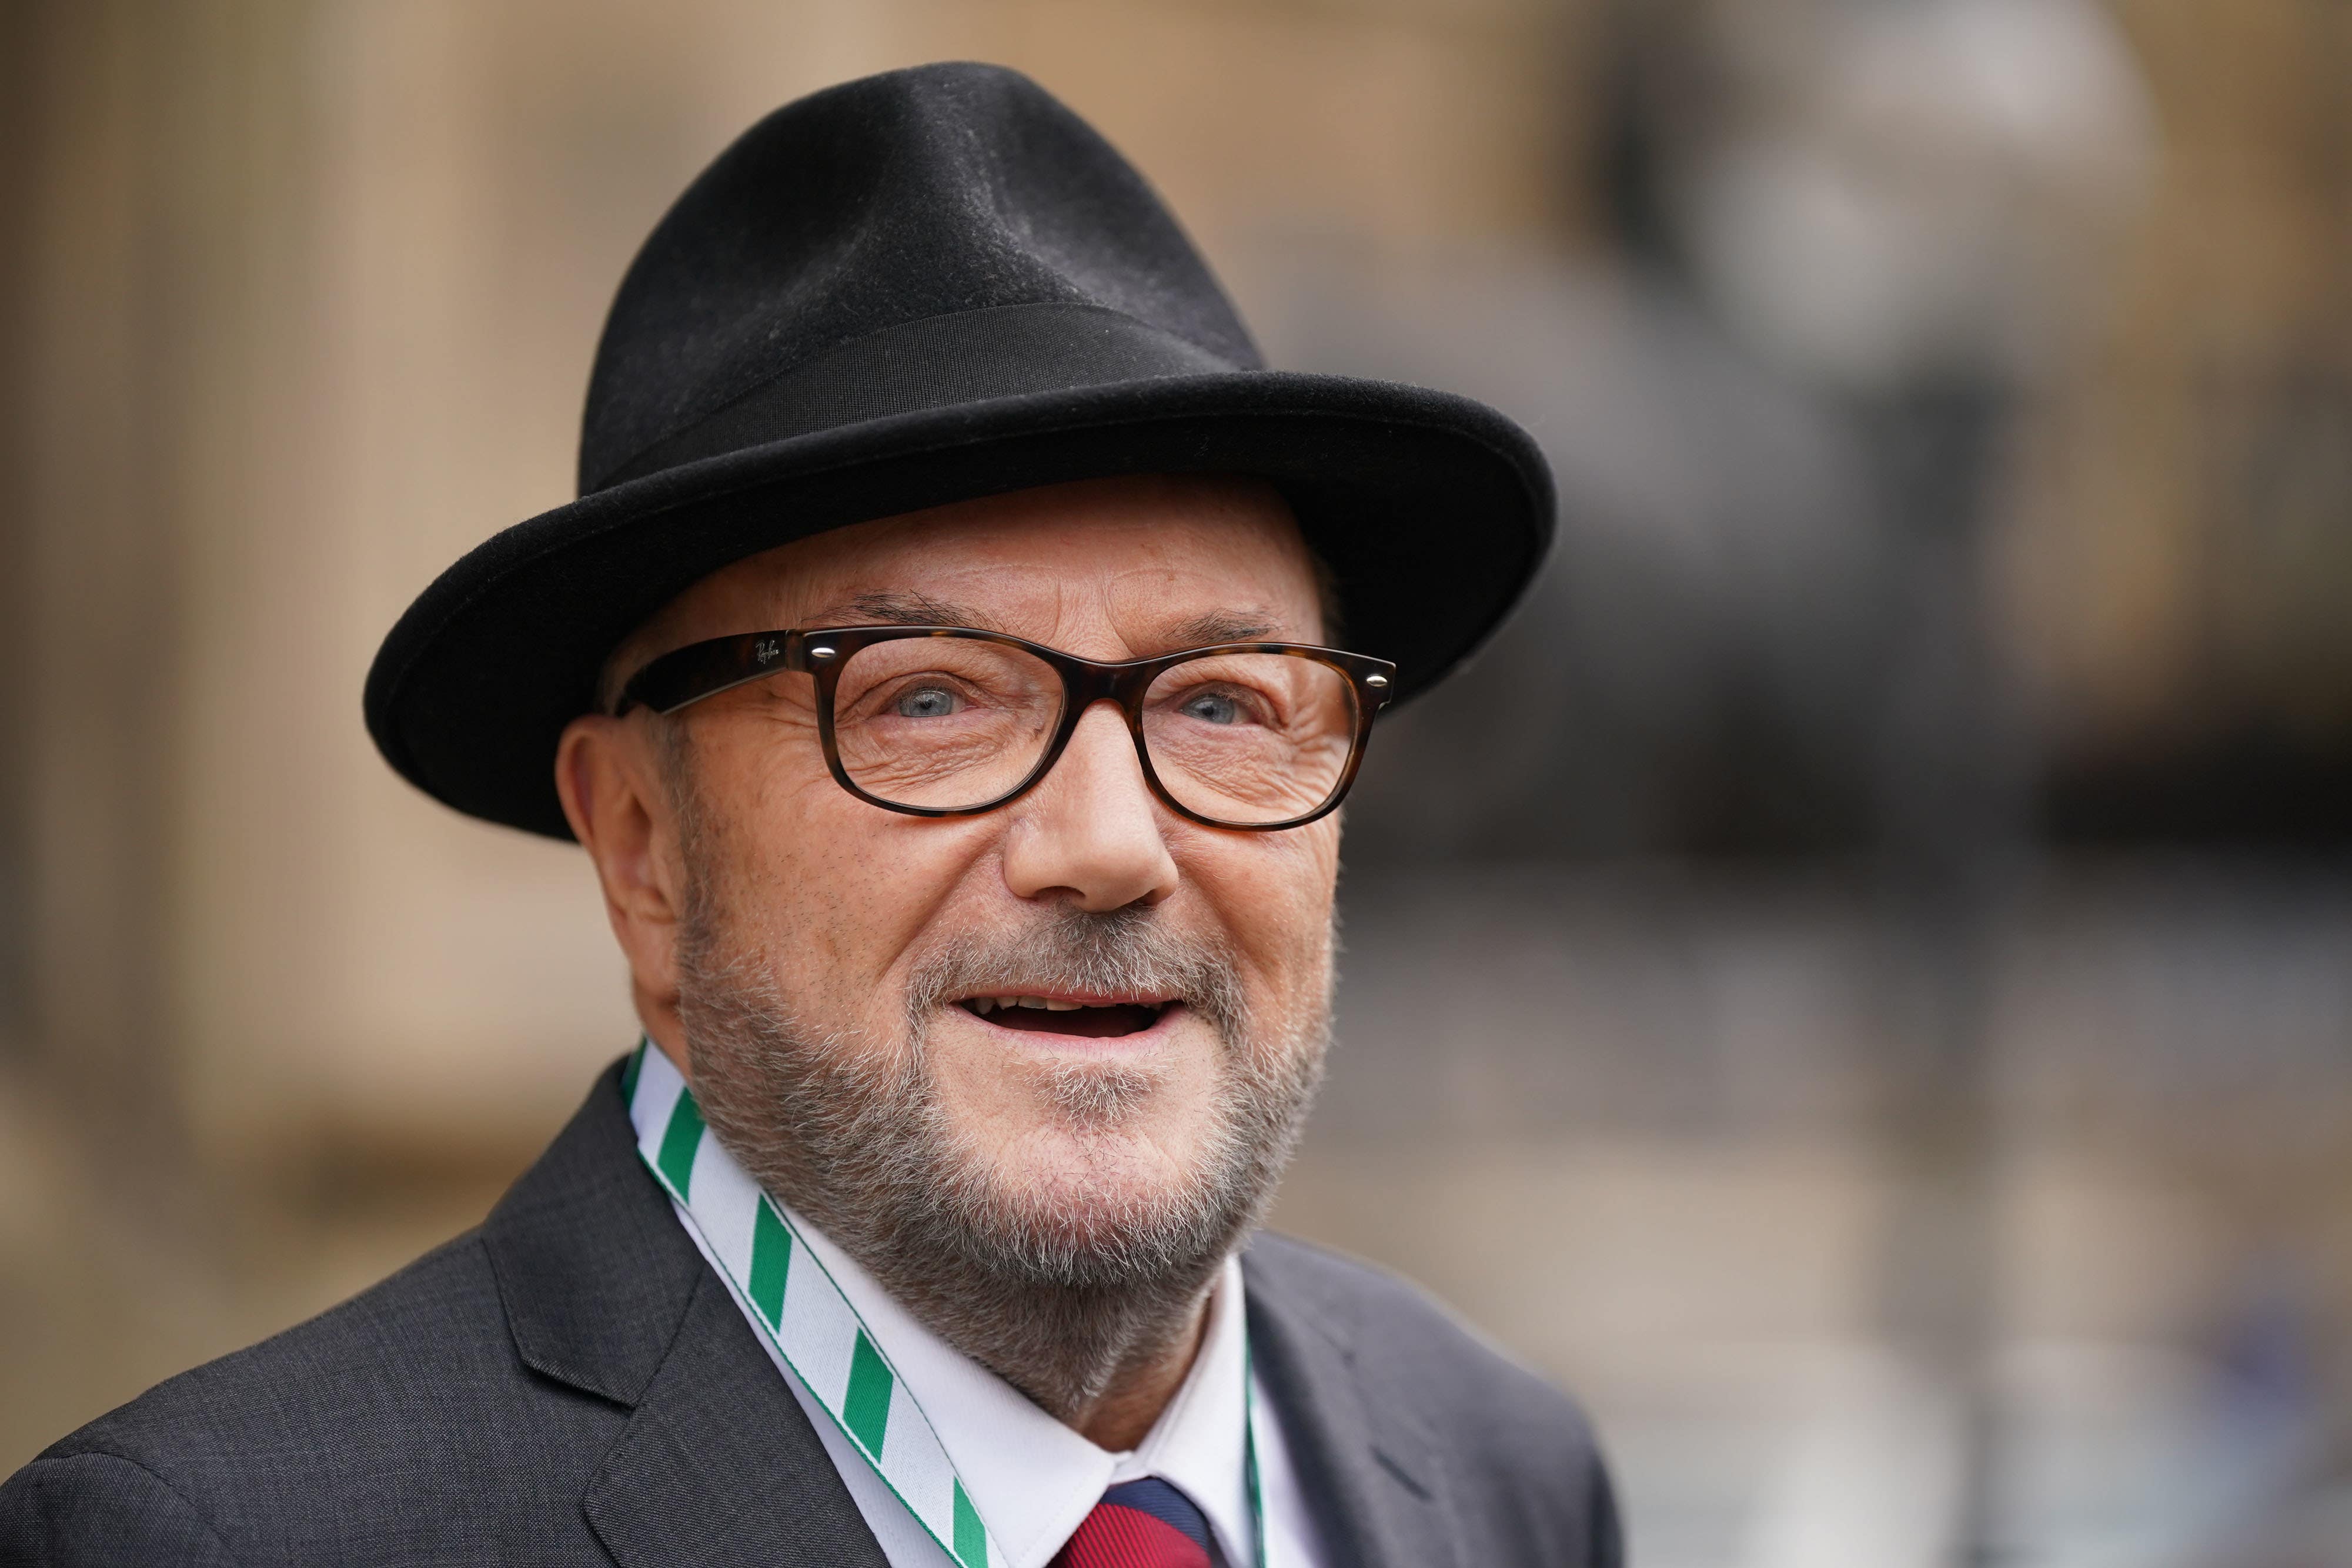 Newly elected MP for Rochdale, George Galloway, speaks to the media outside the Palace of Westminster (Yui Mok/PA)